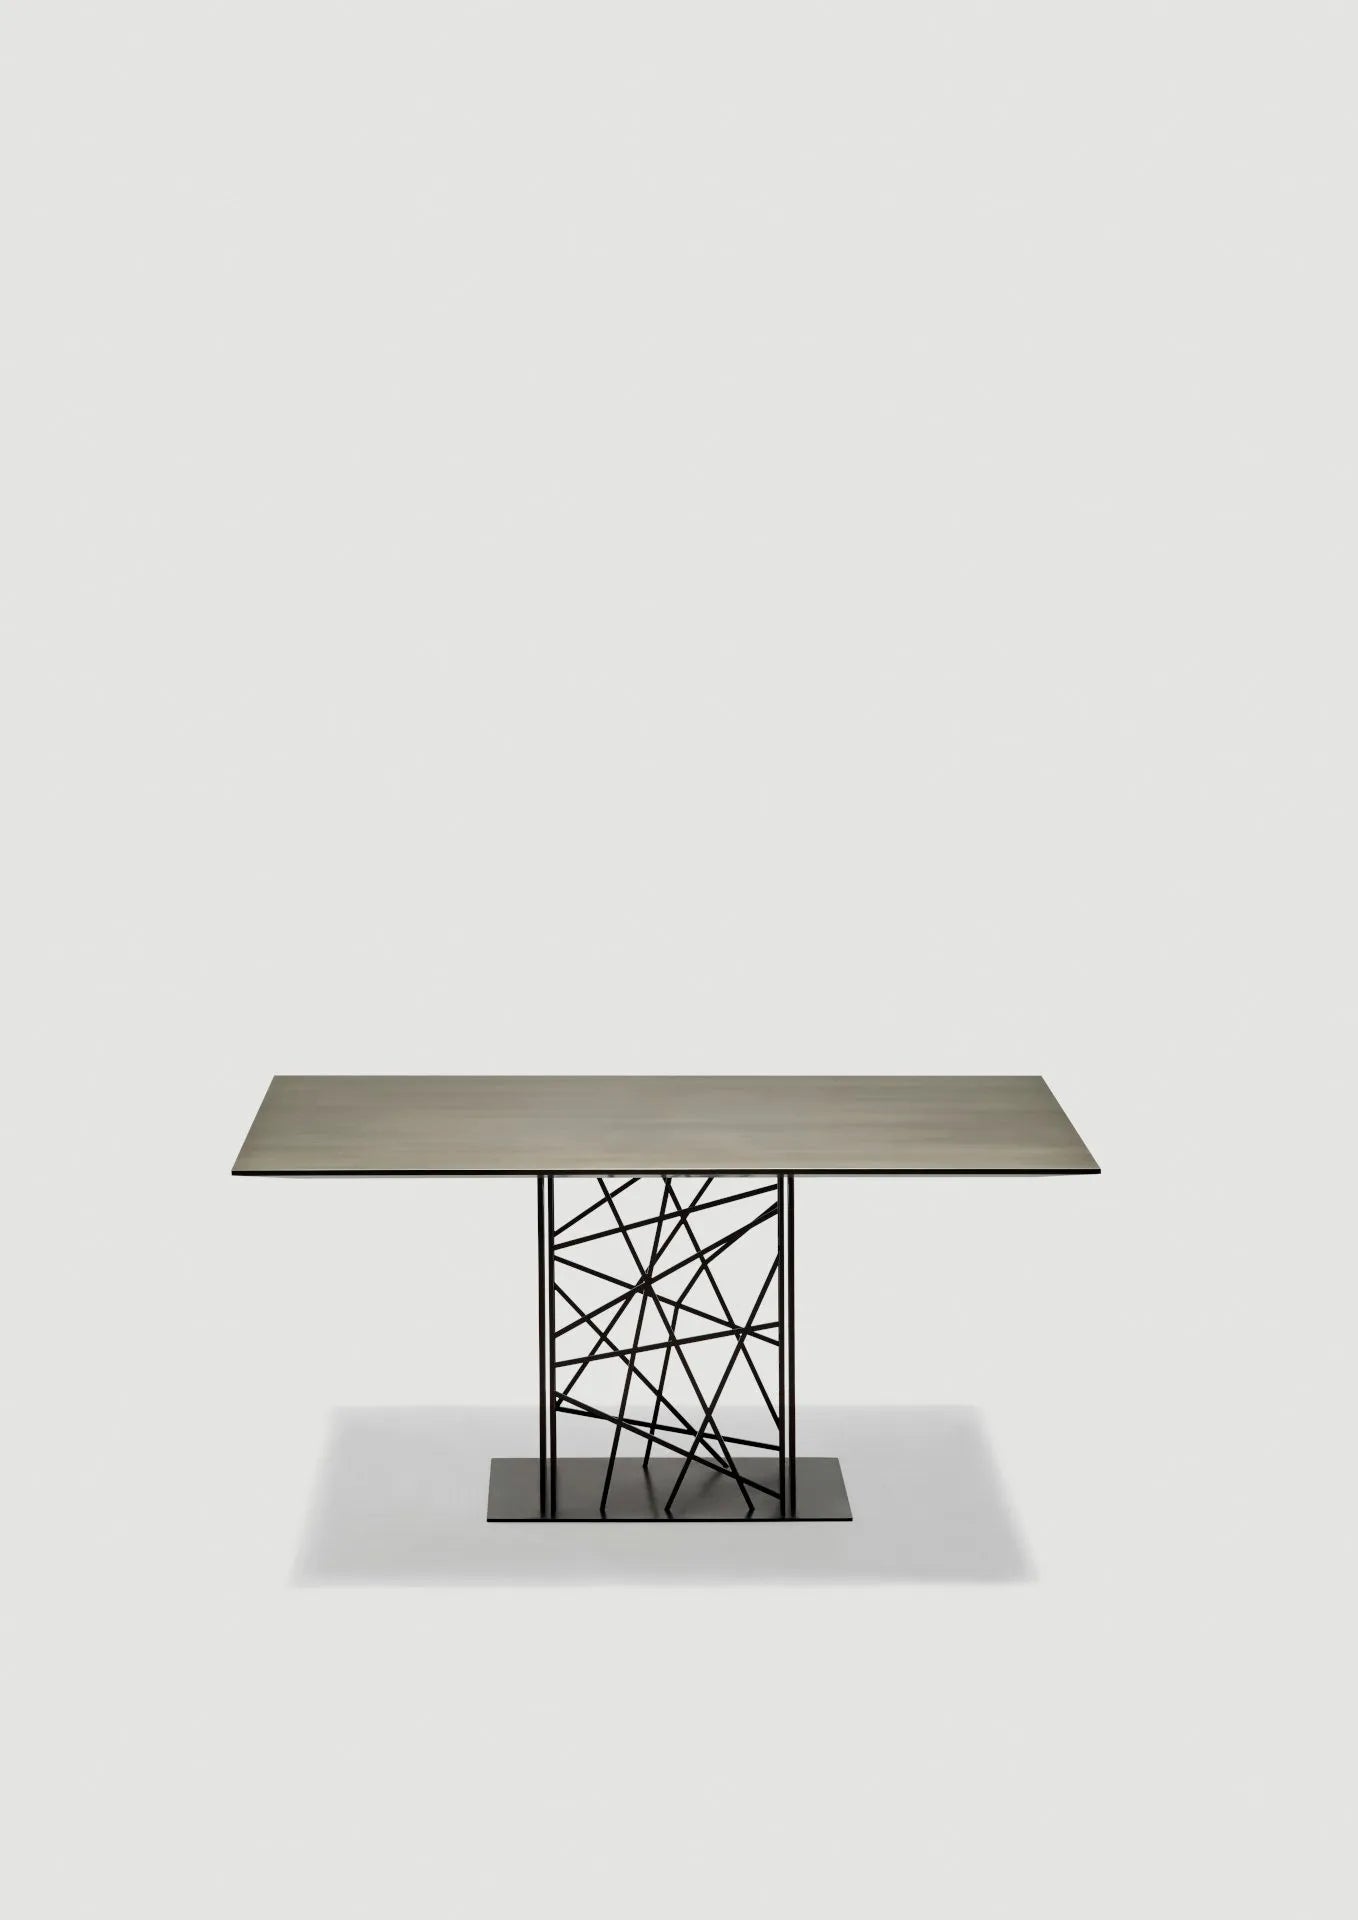 DFRAME TABLE BY DAA - start from $12,000